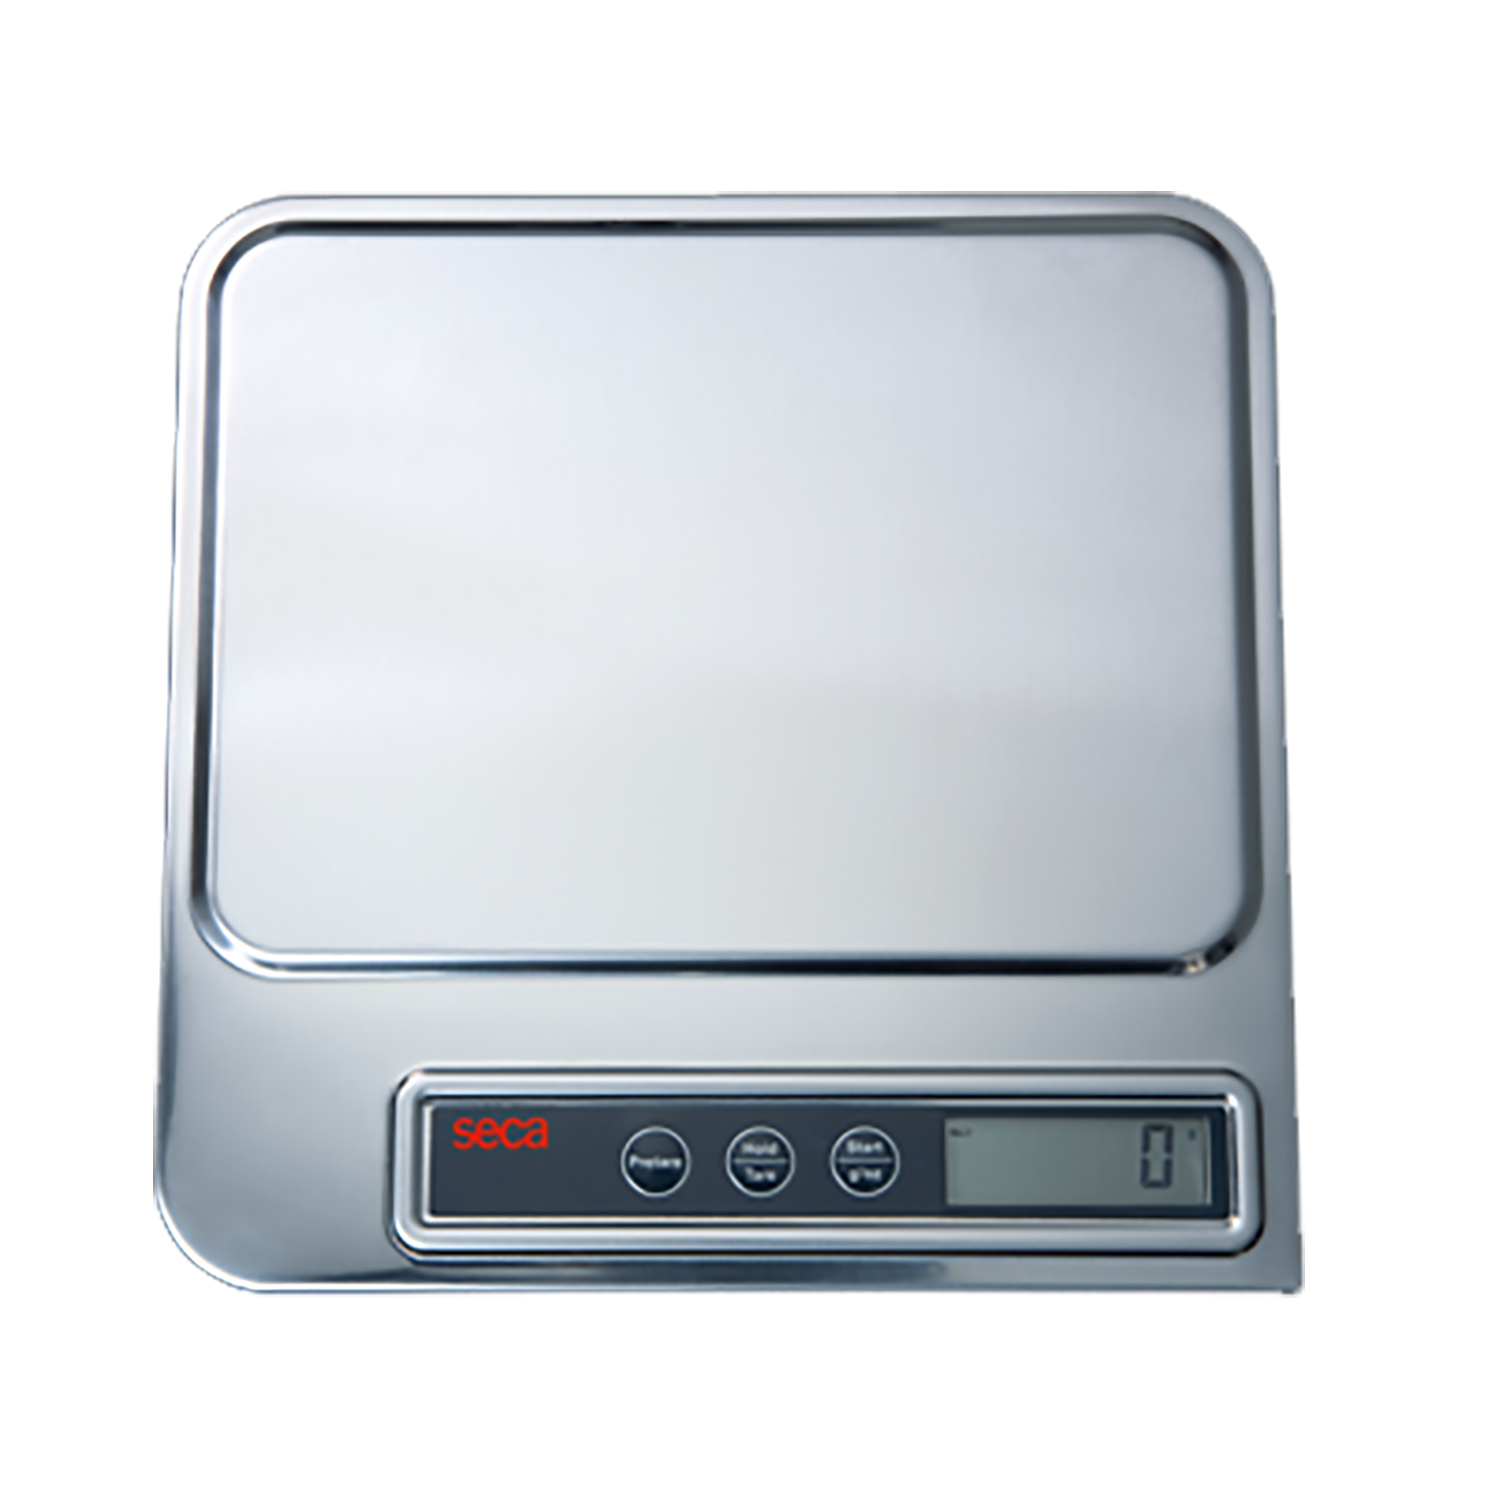 seca 856 Organ & Nappy Scale with stainless steel cover & moisture protected electronics